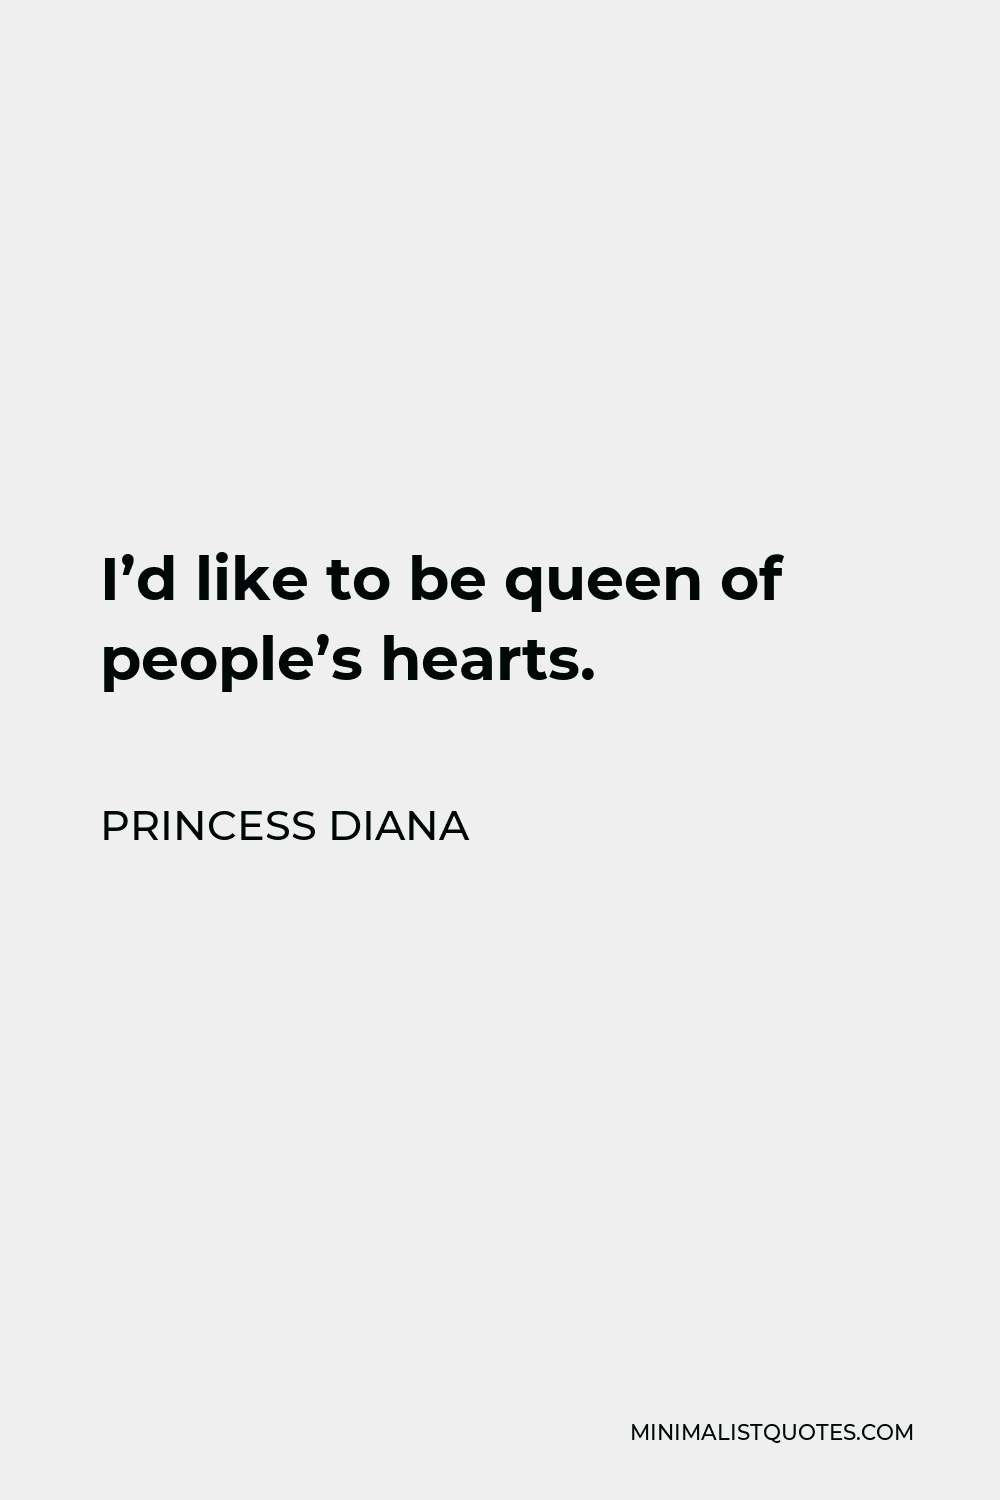 Princess Diana Quote - I’d like to be queen of people’s hearts.